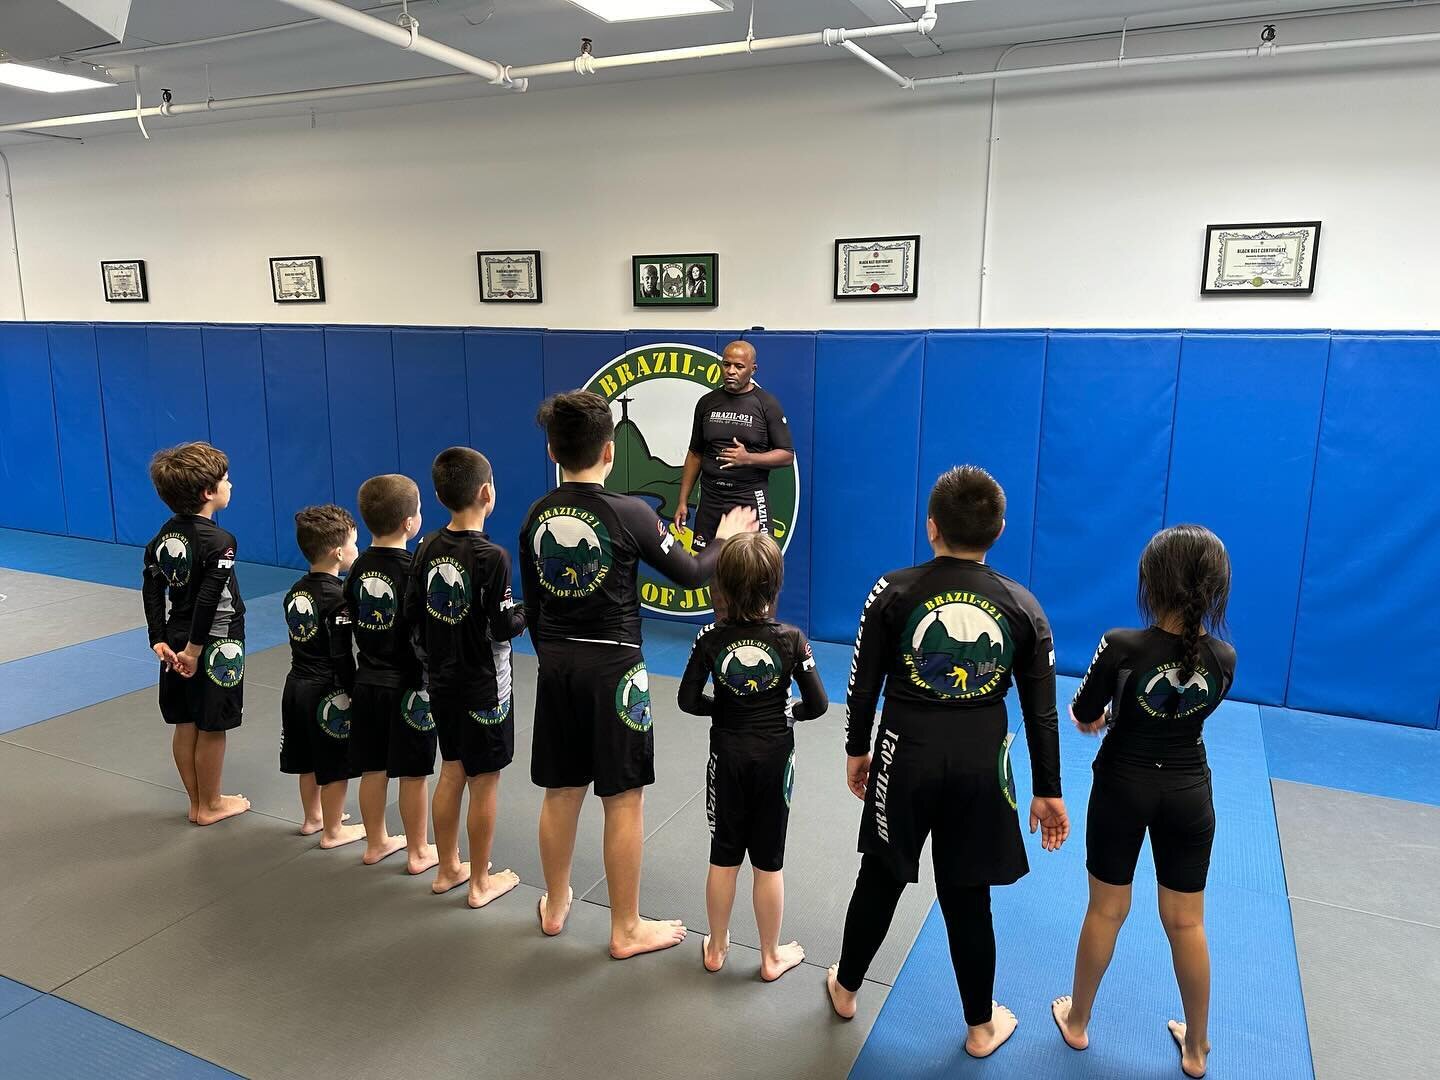 Never doubt that a small group of thoughtful, committed citizens can change the world; indeed, it&rsquo;s the only thing that ever has.

Margaret Mead

#brazil021 #bjjkids #kidsbjj #bjjnogi #nogibjj #teamworkmakesthedreamwork #brazil021chicago #beyon